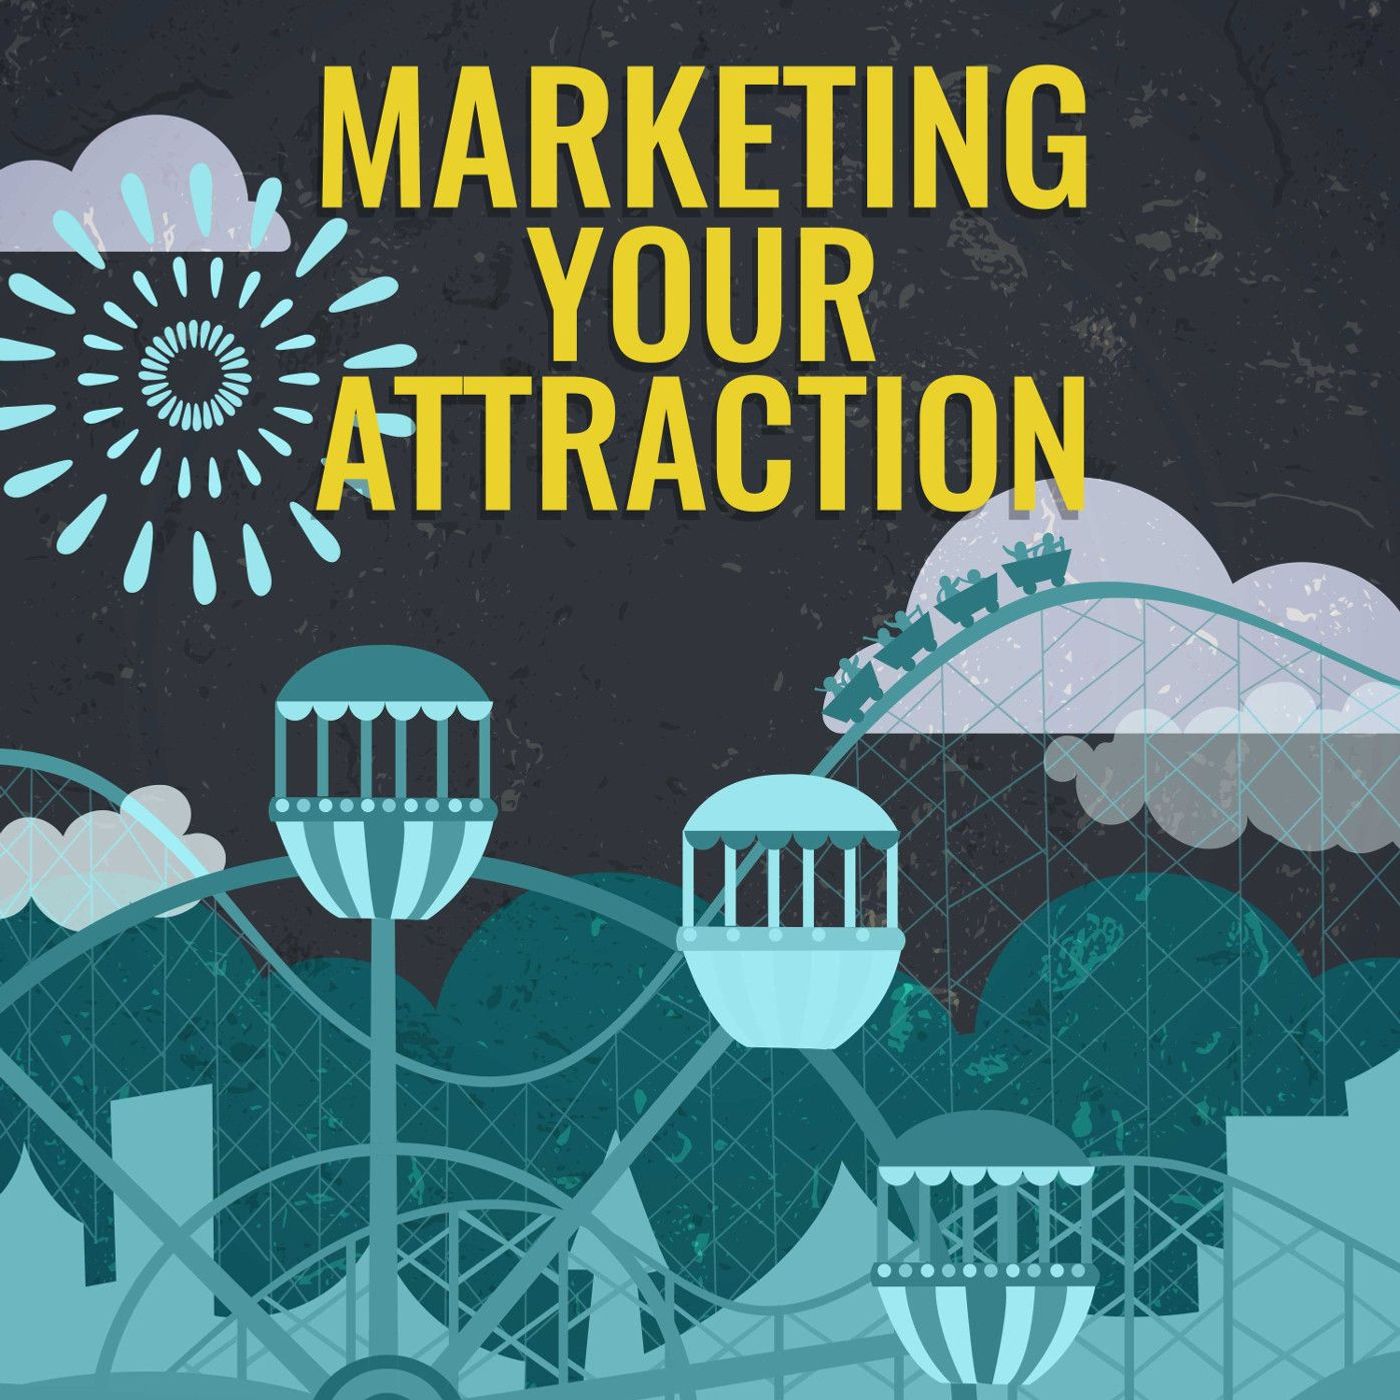 [Marketing Your Attraction] How To Use Story in Your Marketing and Drive Revenue